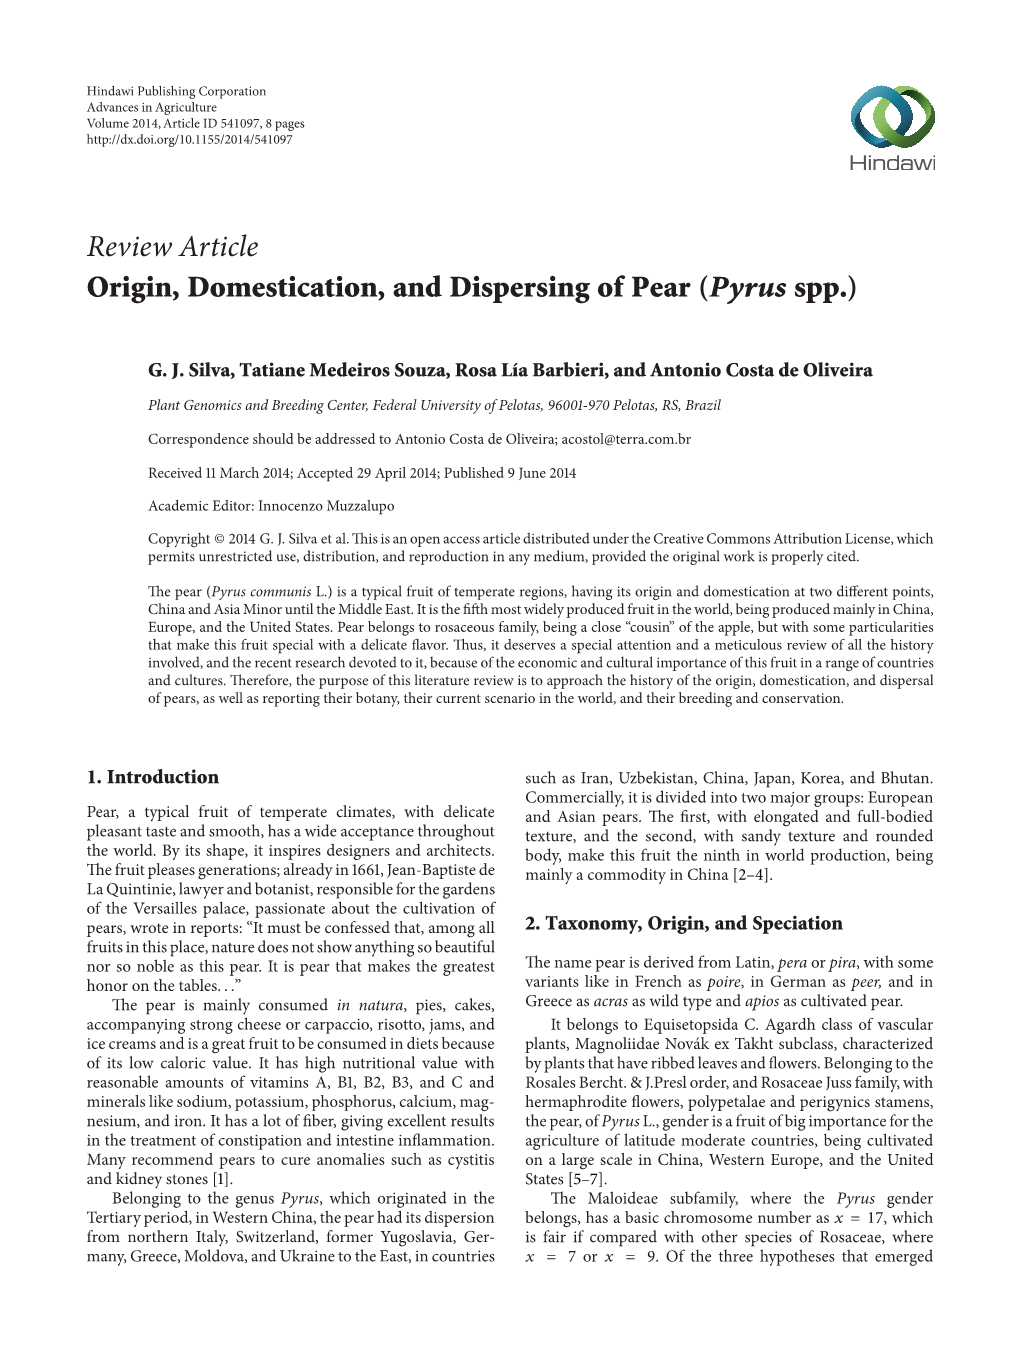 Review Article Origin, Domestication, and Dispersing of Pear (Pyrus Spp.)